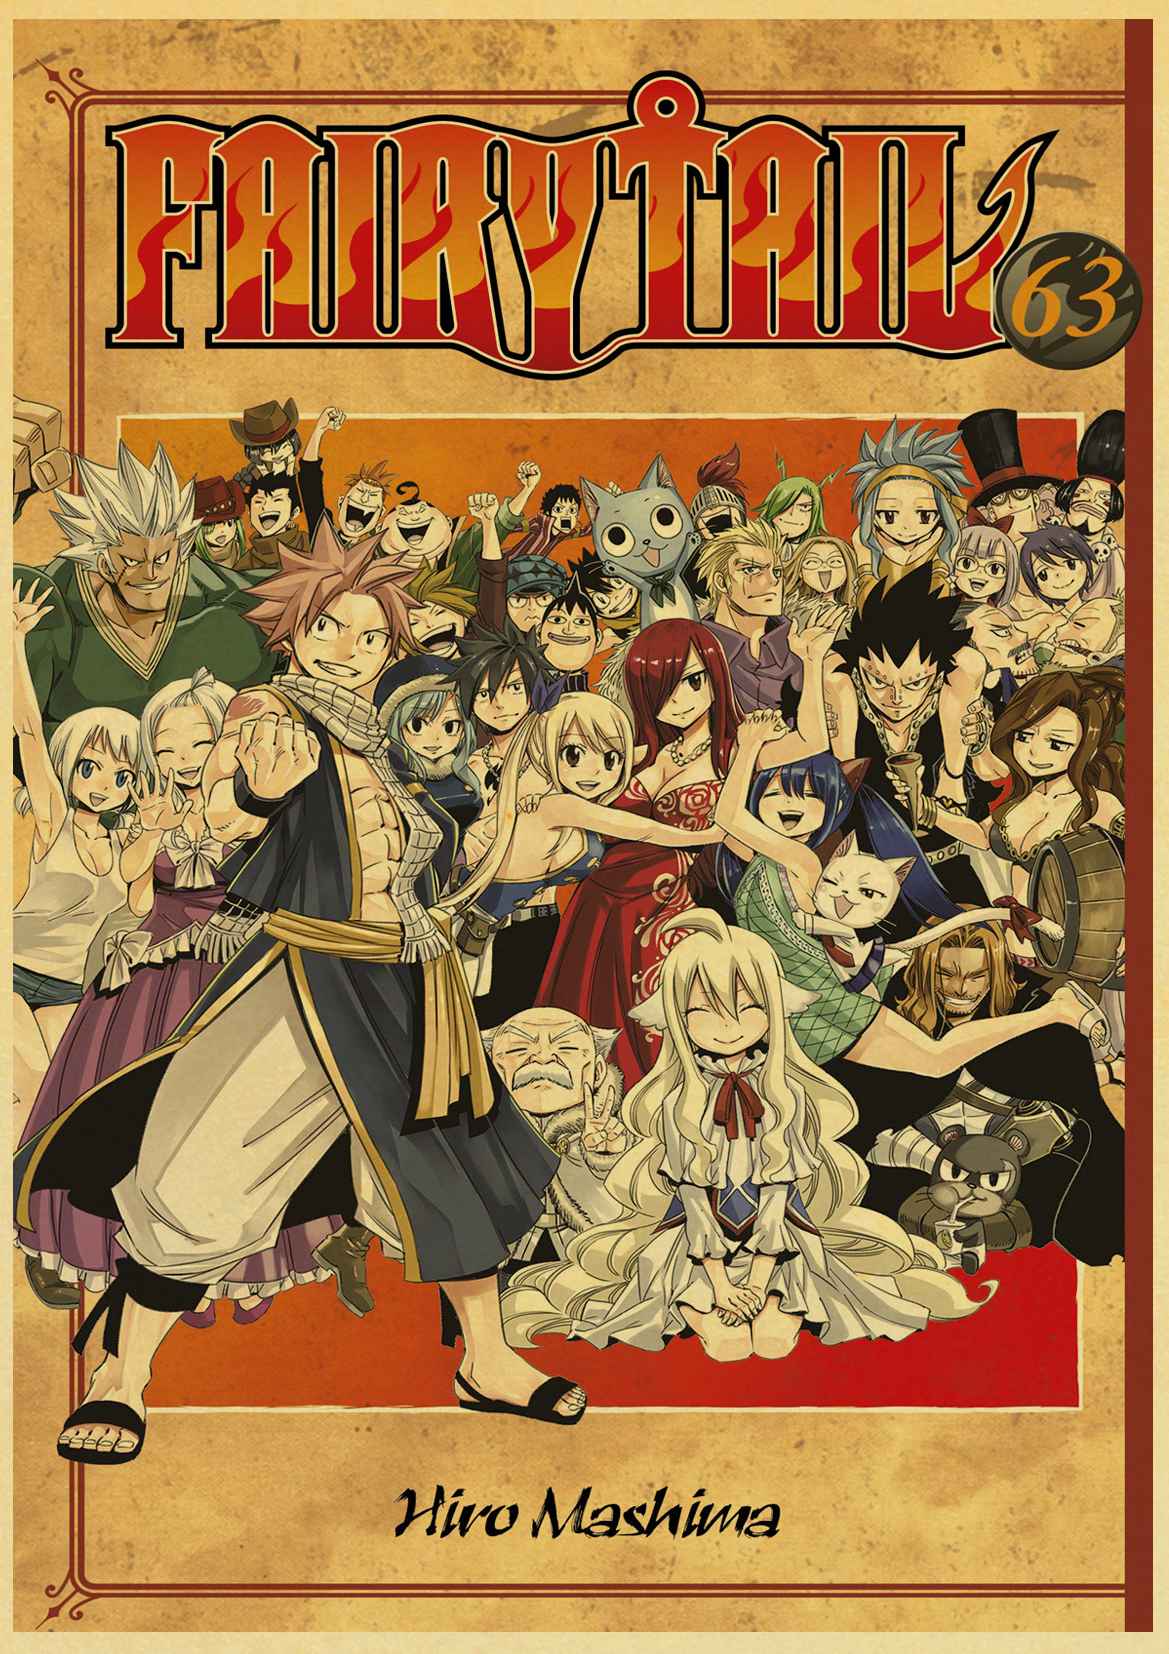 Fairy Tail – All-in-One Characters Themed Retro Wall Posters (20+ Designs) Posters